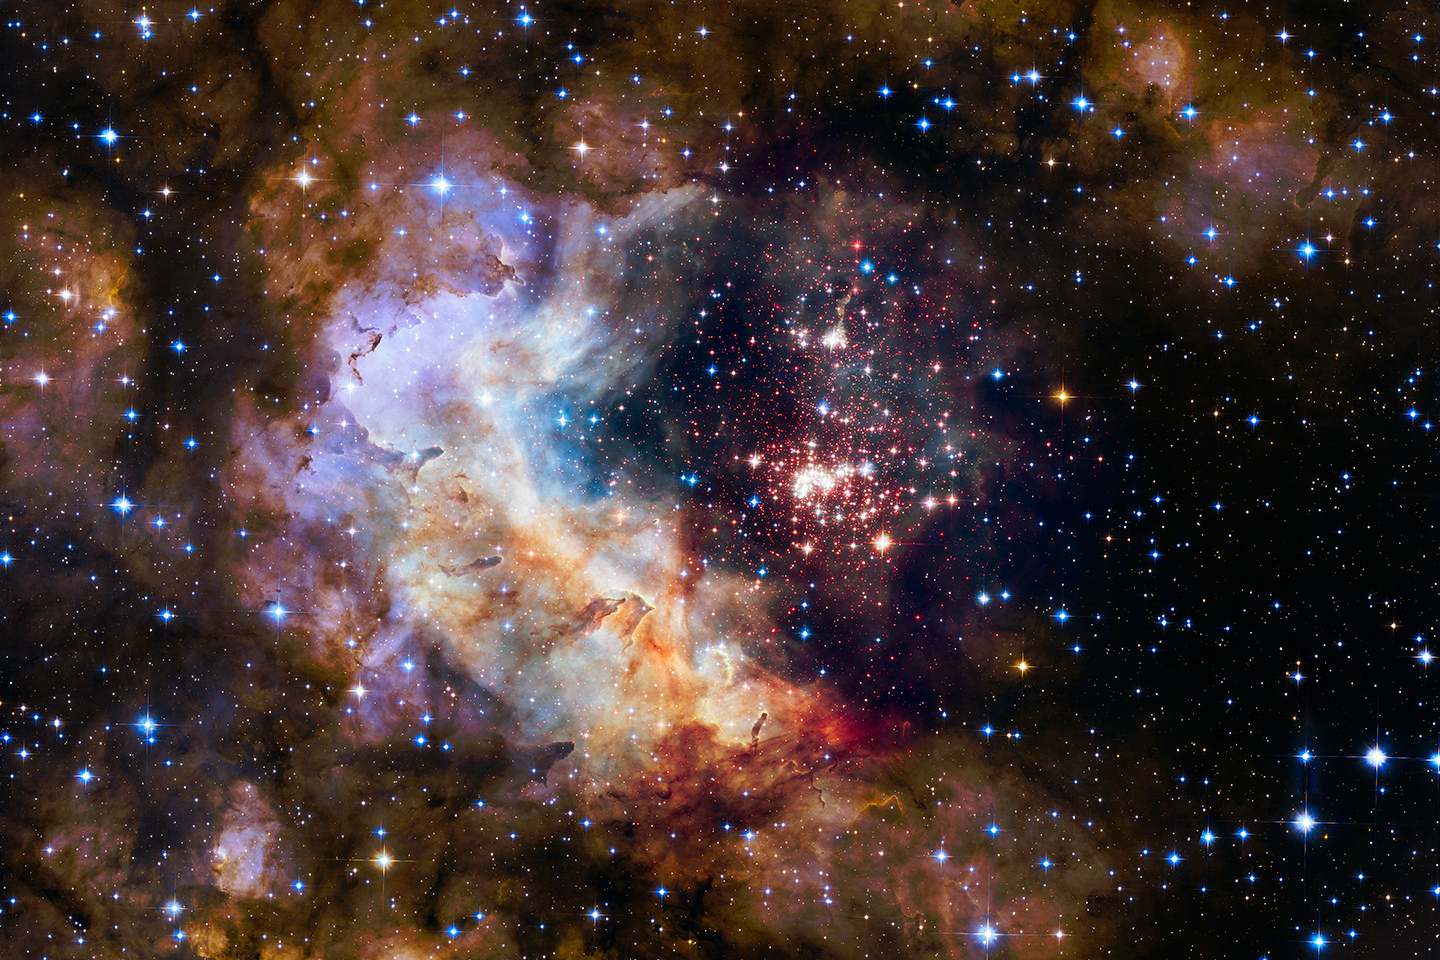 Image of outer space, taken by Hubble Space Telescope